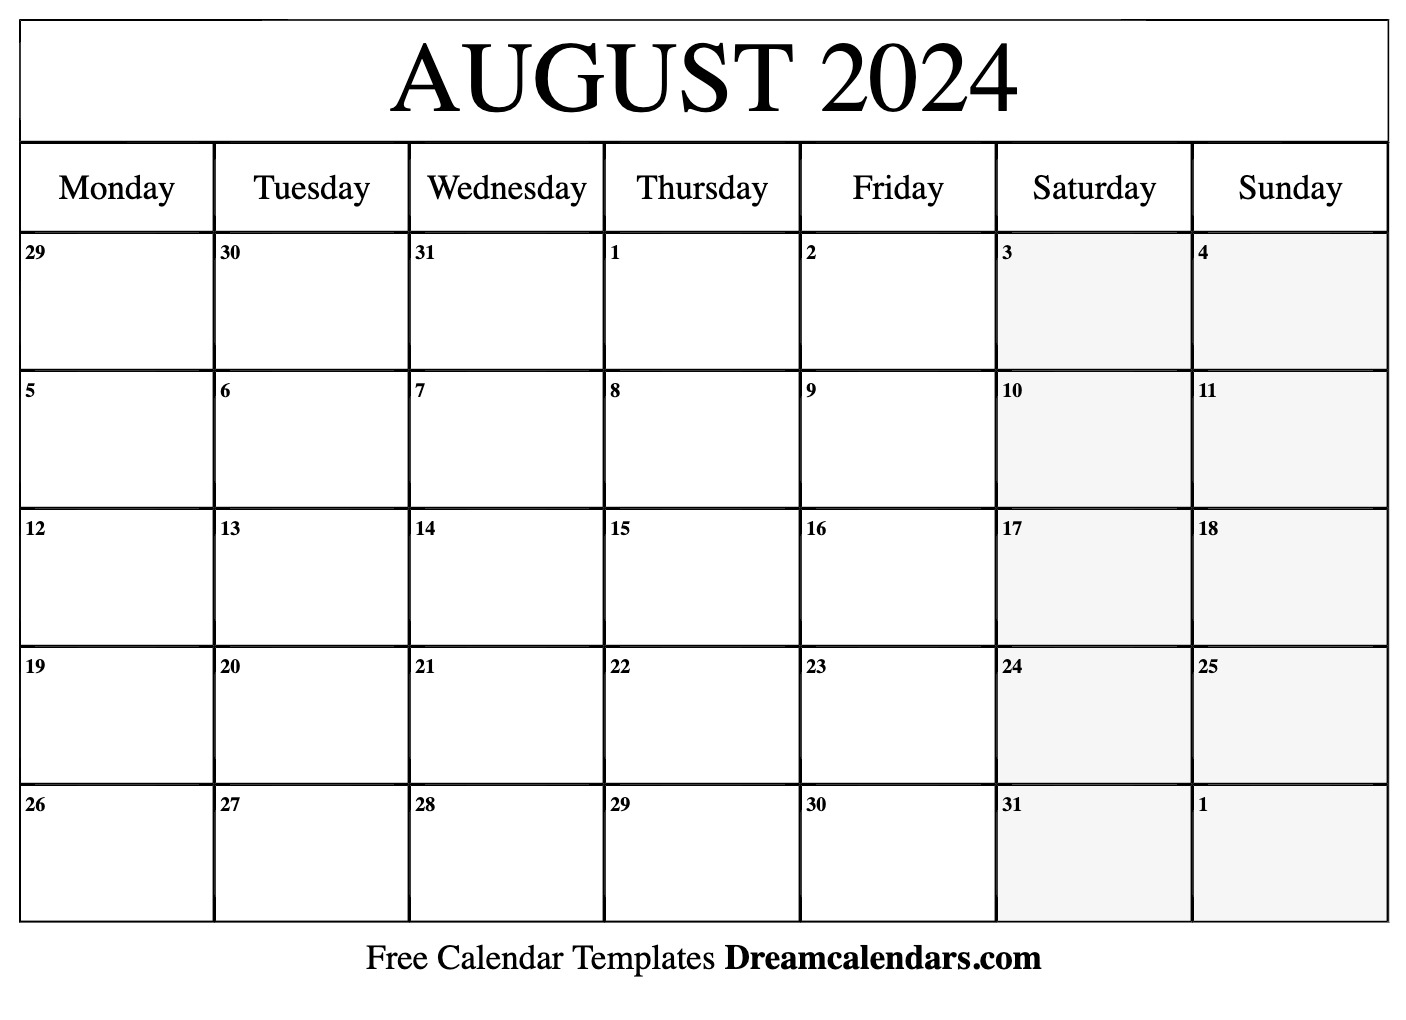 August 2024 Calendar | Free Blank Printable With Holidays for Free Printable August 2024 Calendar With Holidays